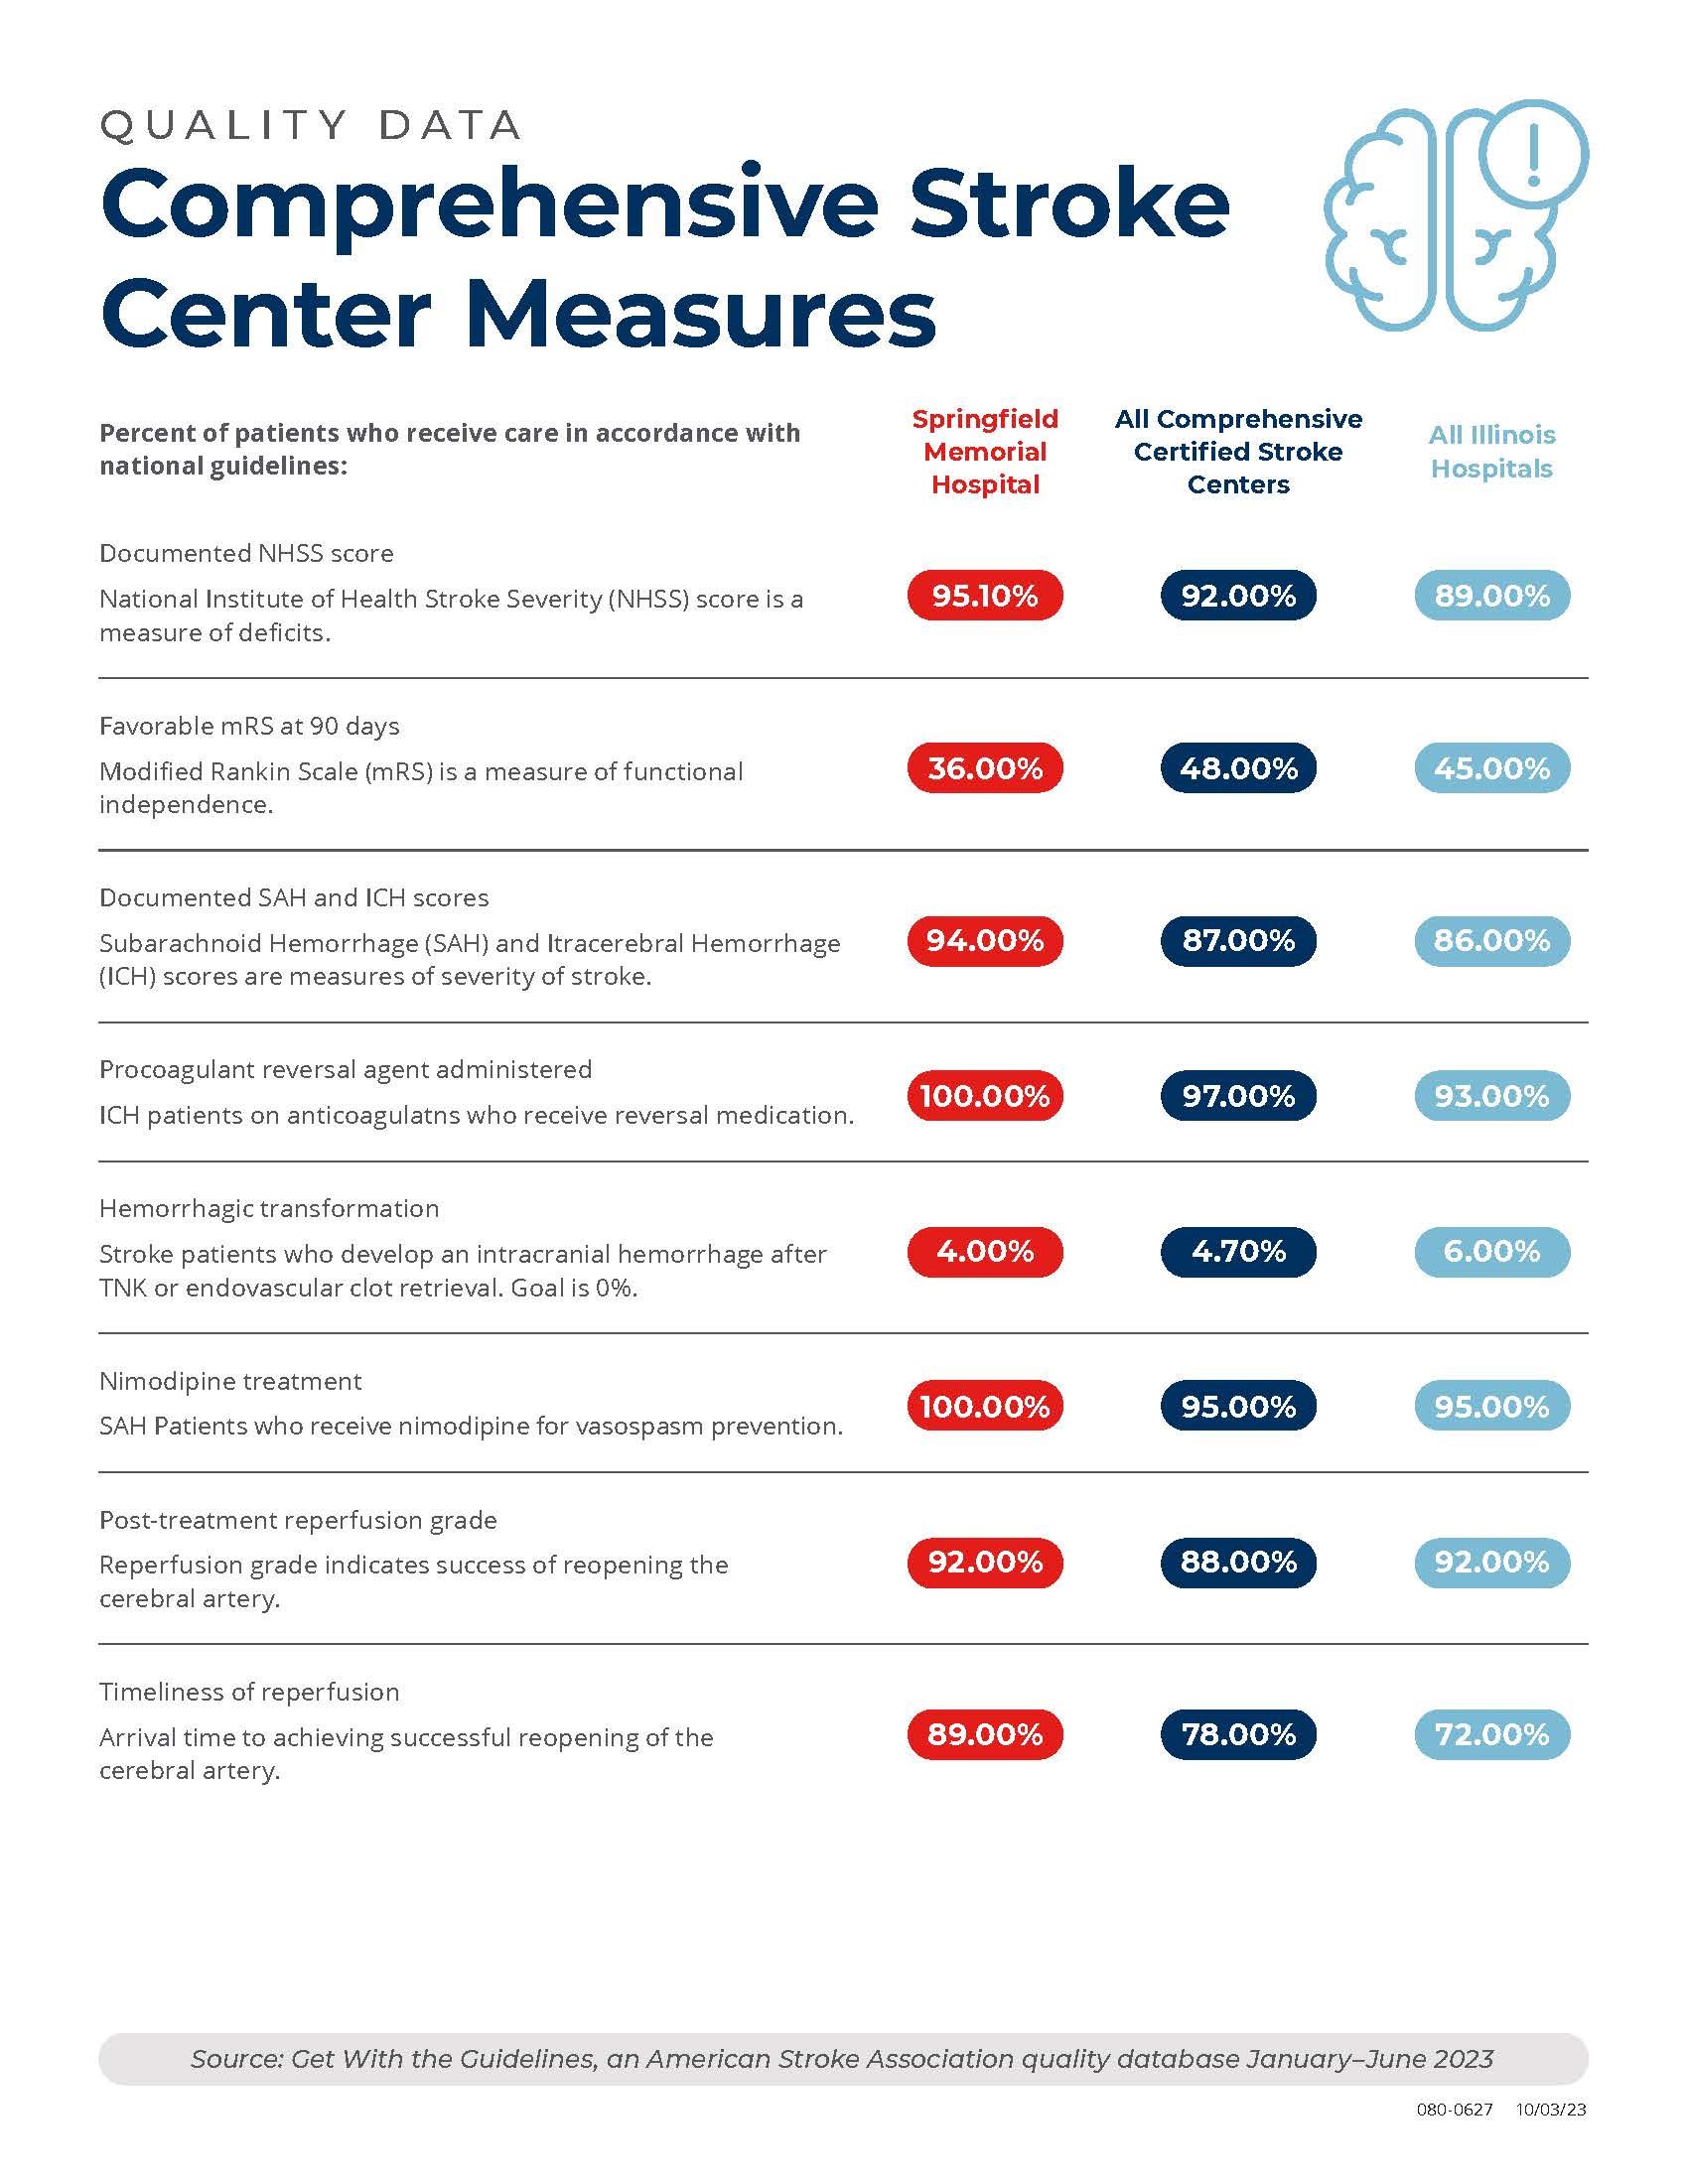 An infographic listing comprensive stroke center measures comparing Springfield Memorial Hospital to all comprensive certified stroke centers. Memorial's score beats competitors.